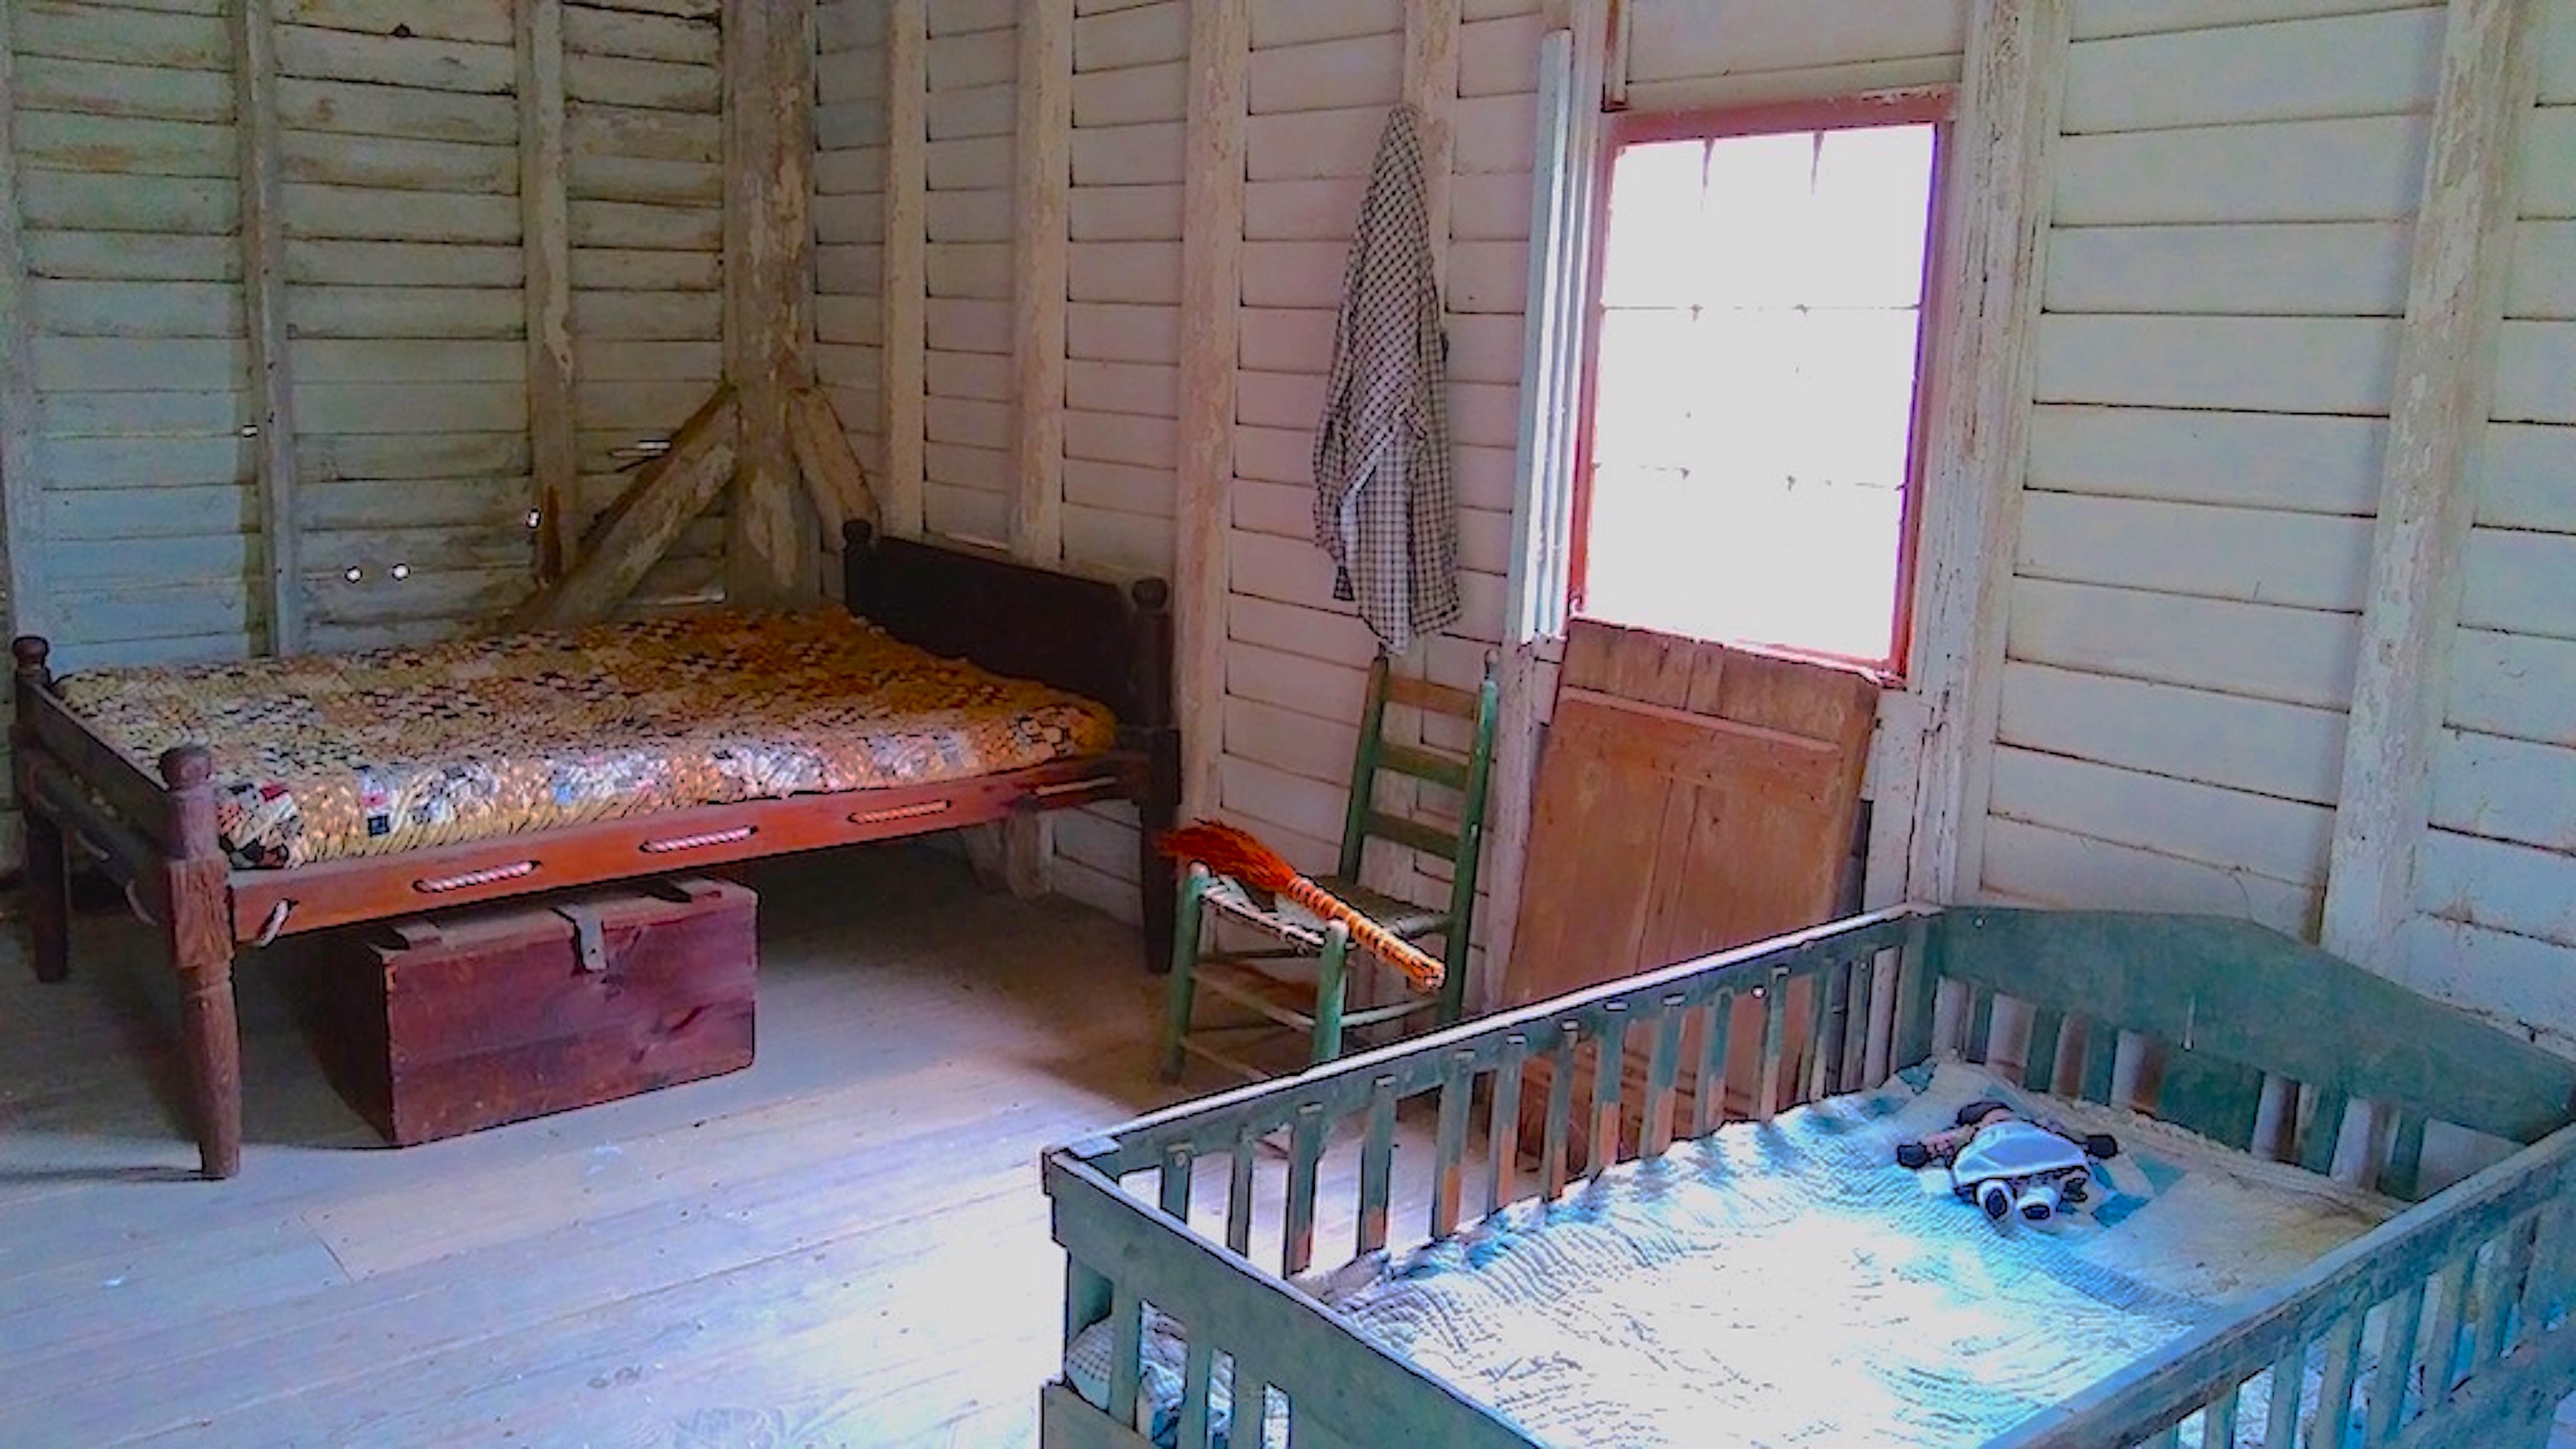 All furniture made in the quarters at the WIlliam Hurt Plantation in Georgia was handmade by those enslaved there.